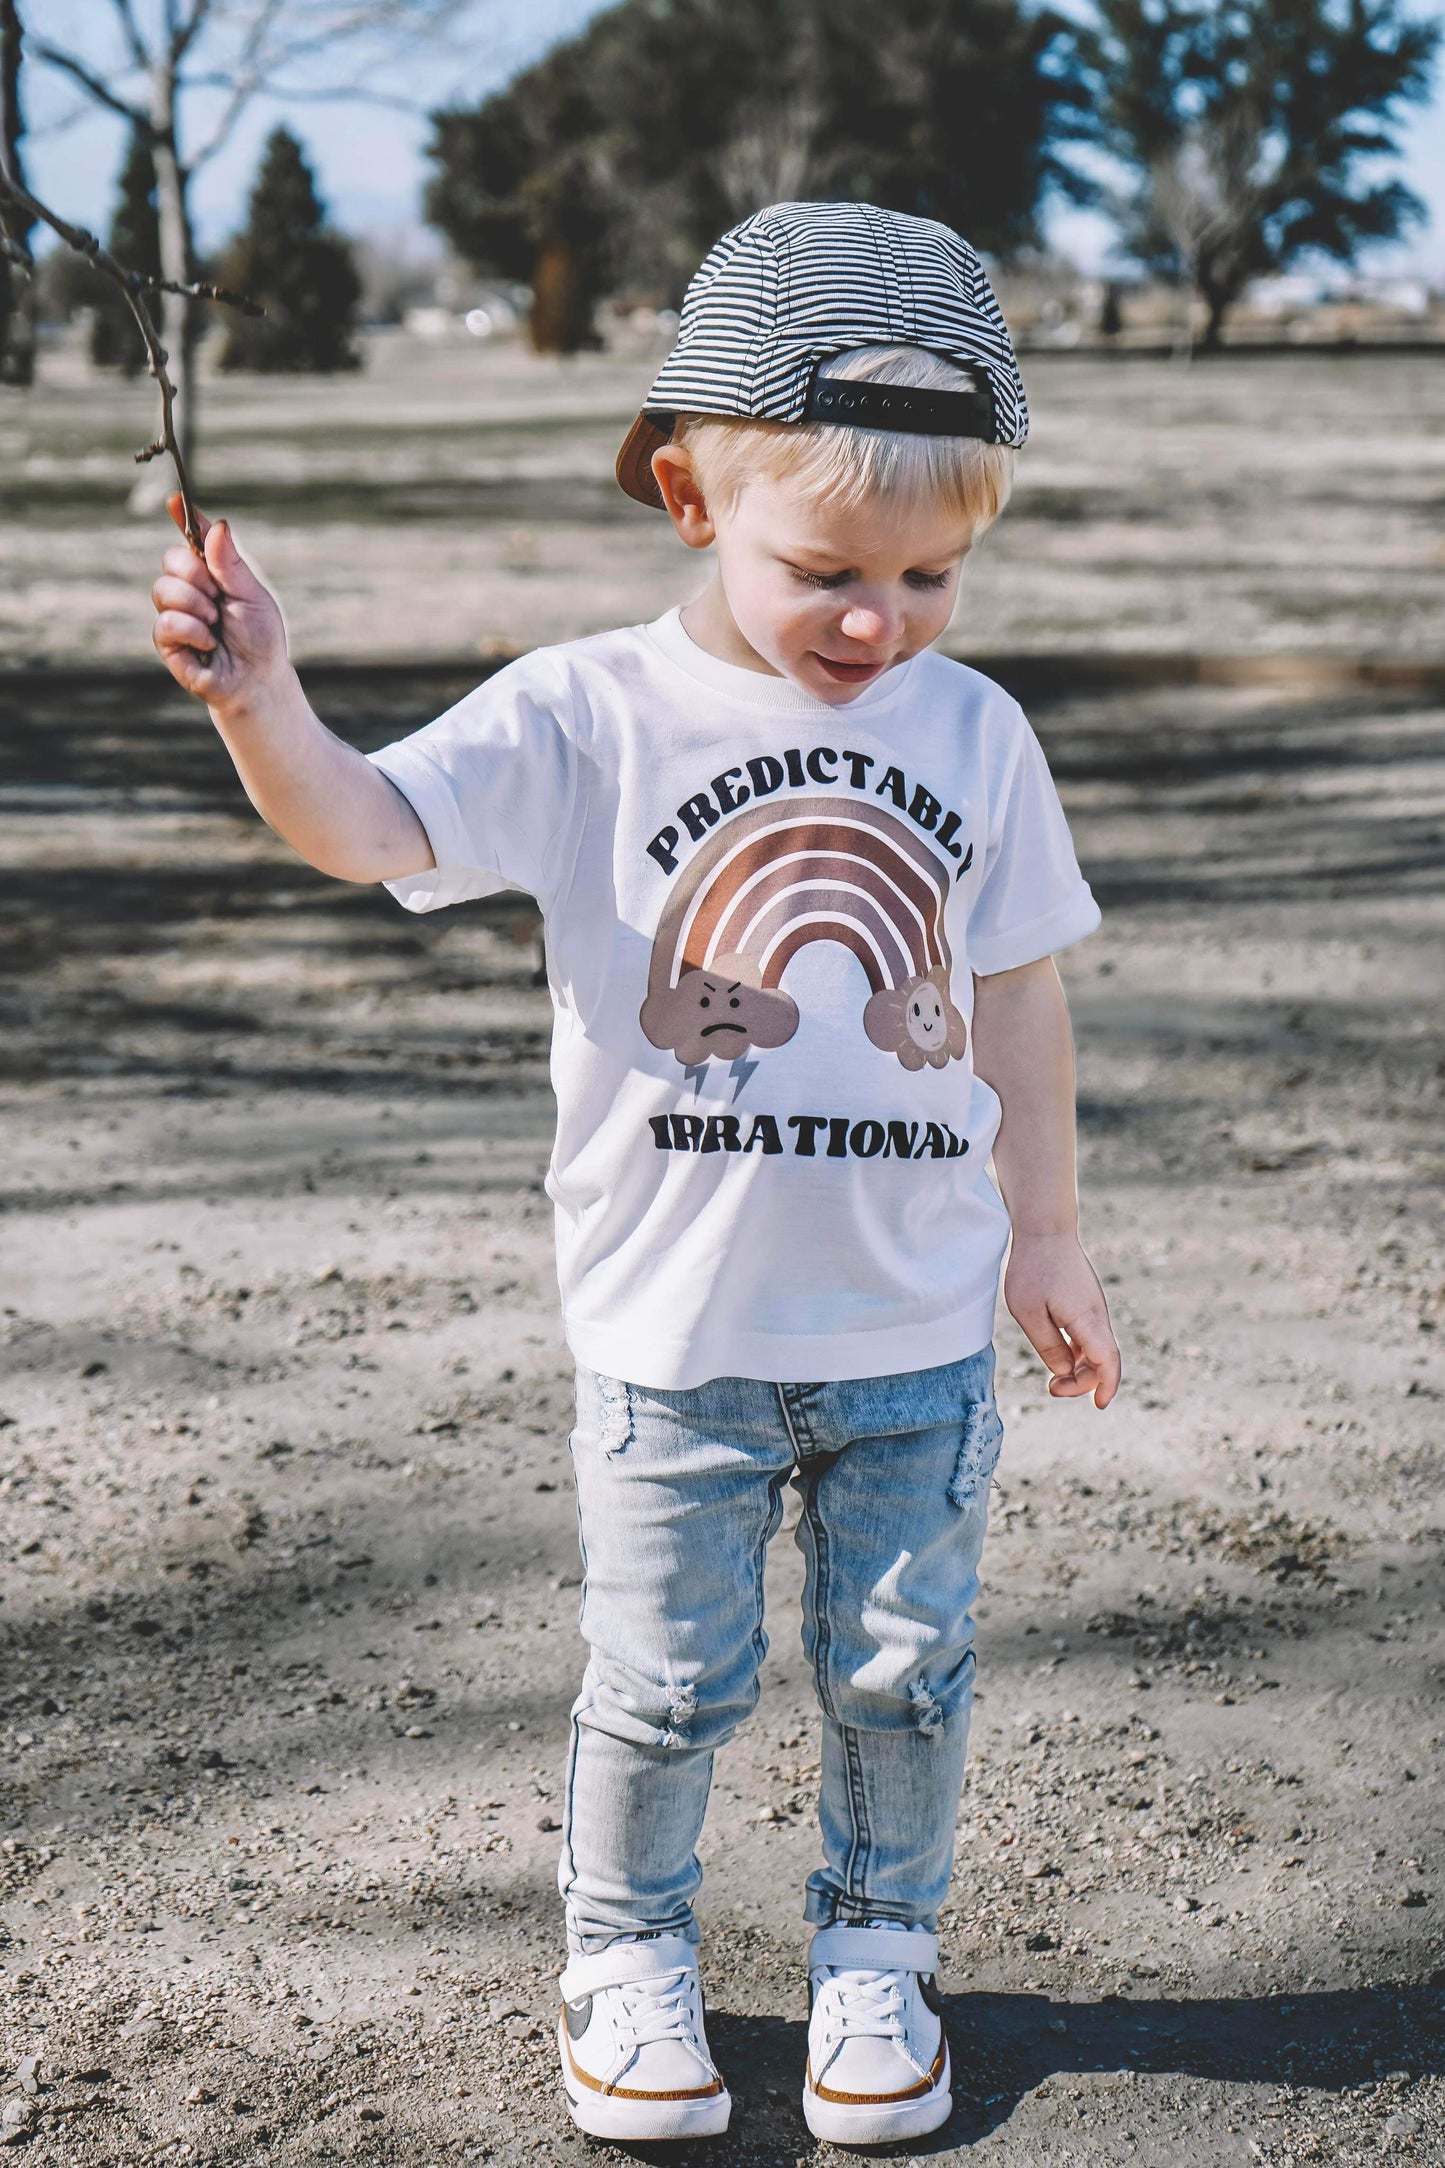 Predictably Irrational toddler tee